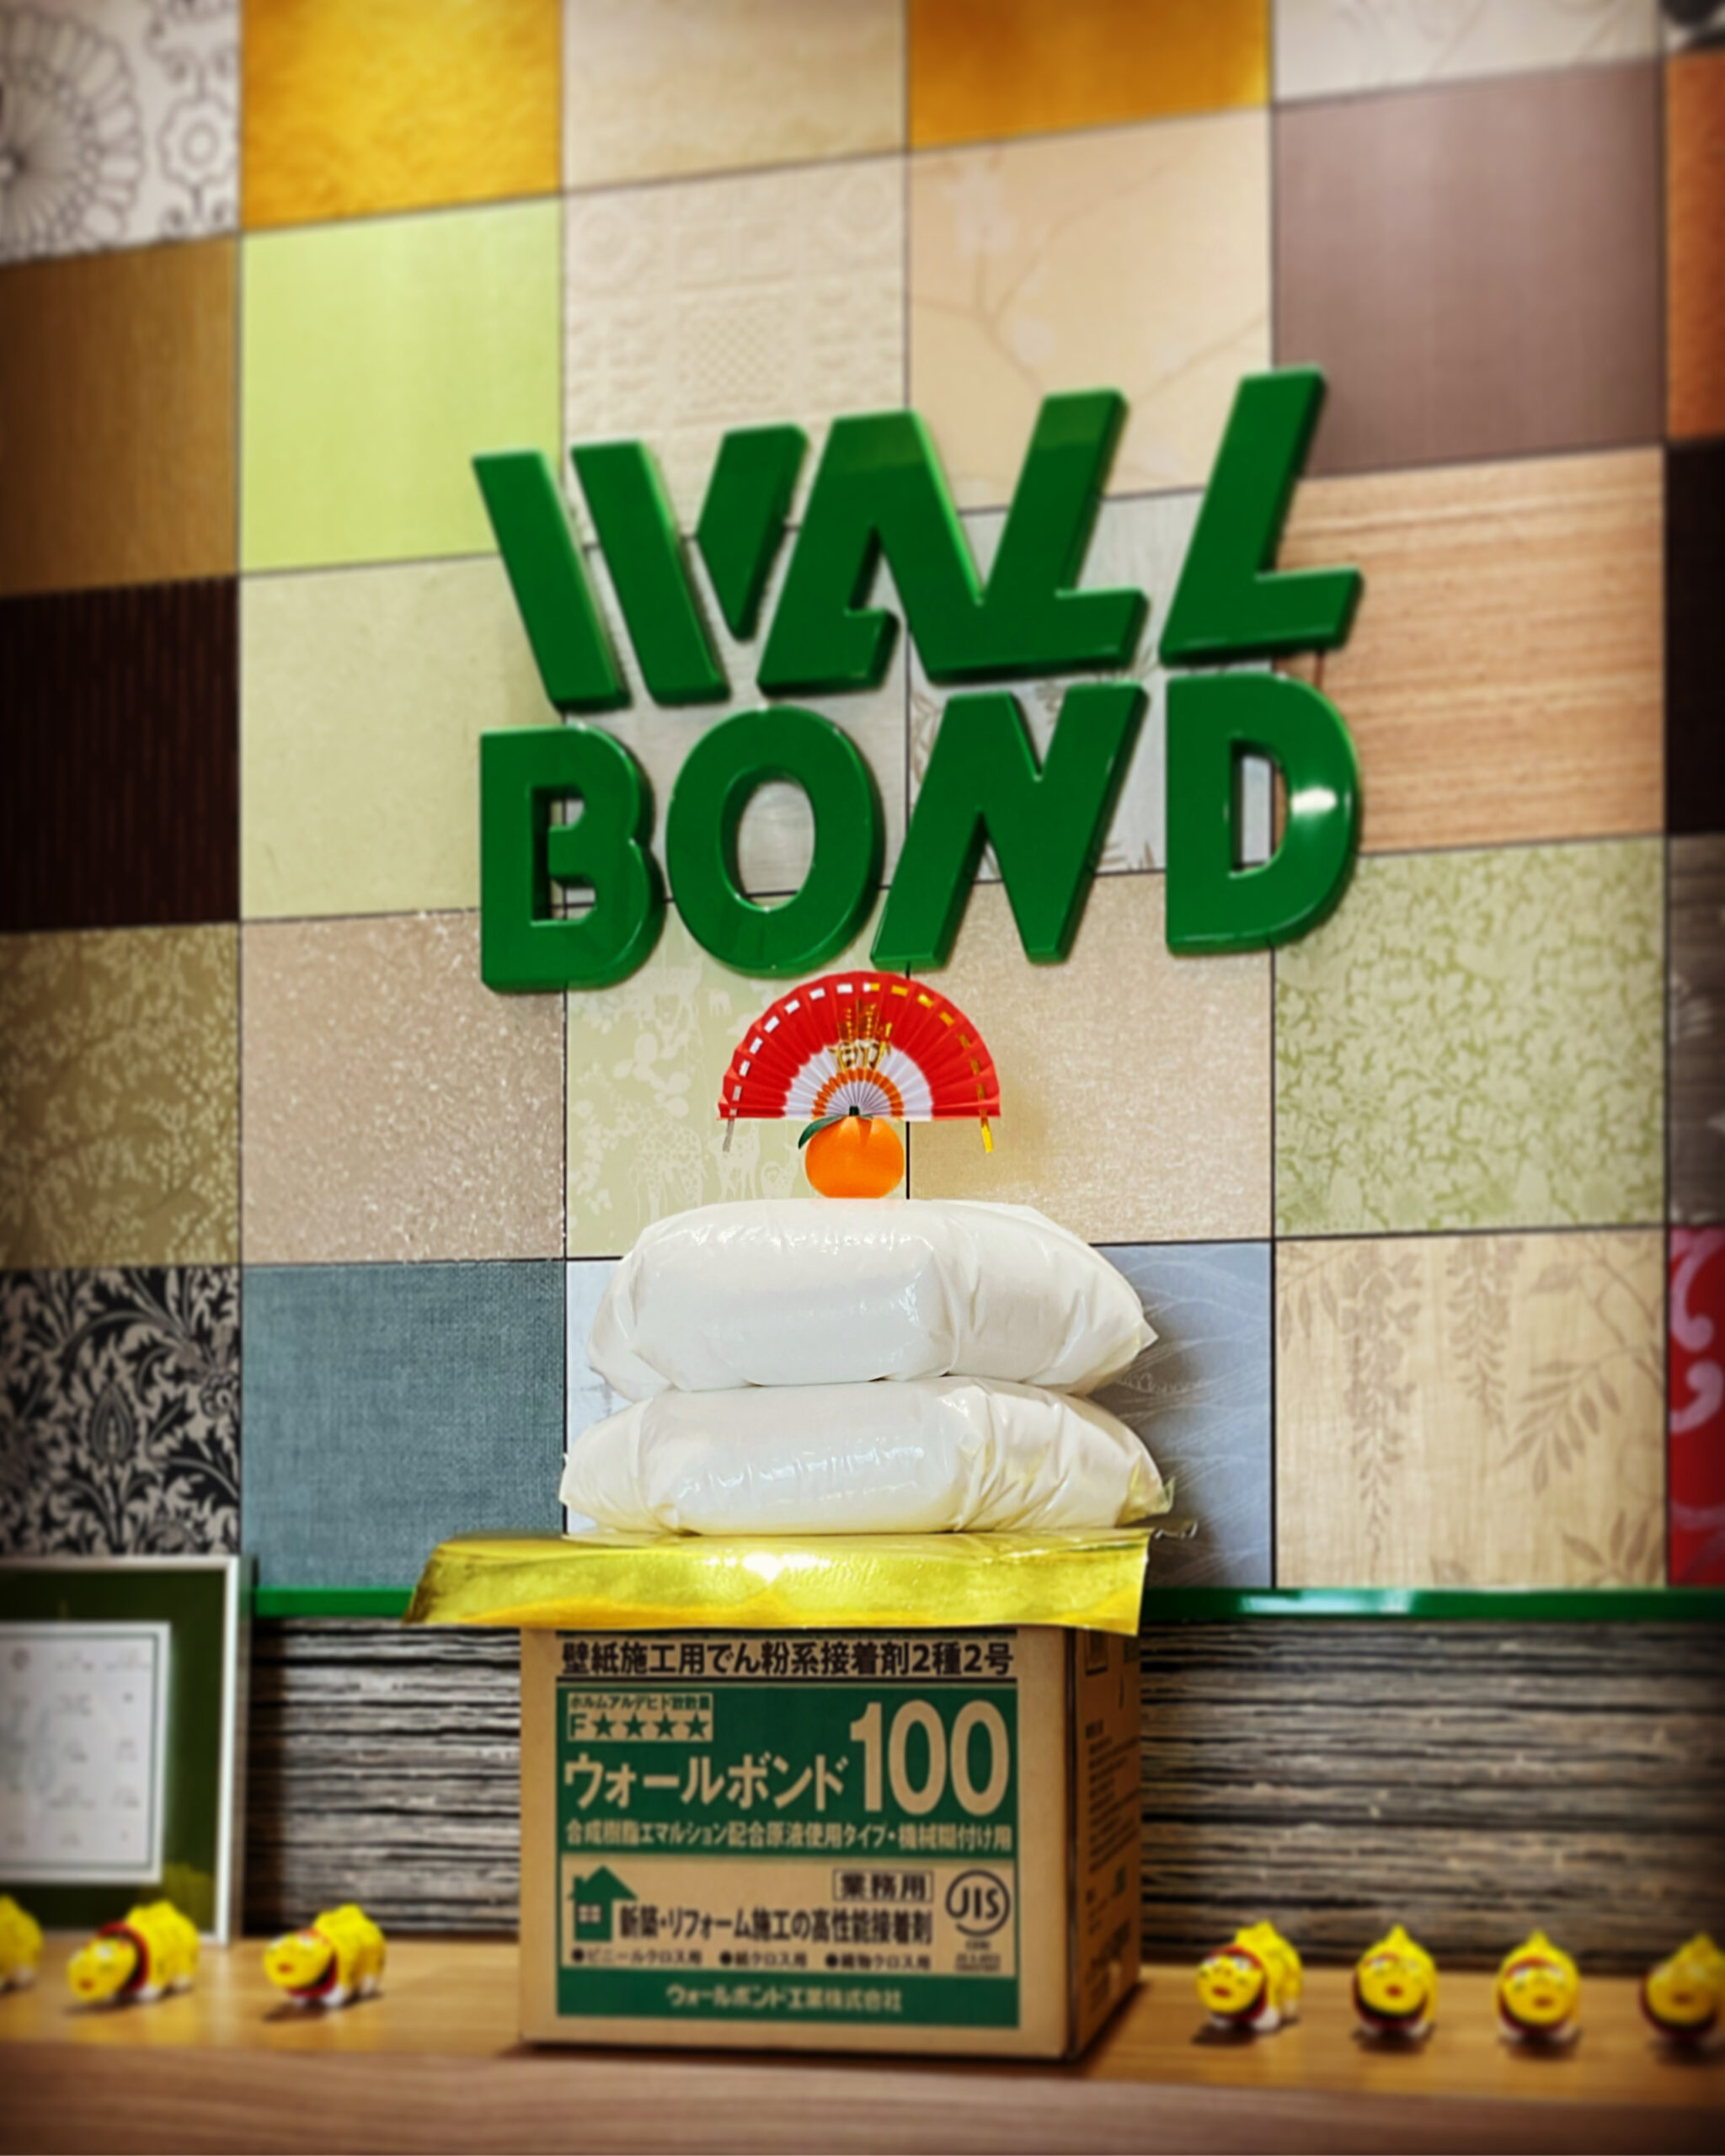 <br />
<b>Warning</b>:  Undefined variable $cf_products_name in <b>/home/xs665859/wallbond.jp/public_html/cms/wp-content/themes/original/single-news.php</b> on line <b>47</b><br />
